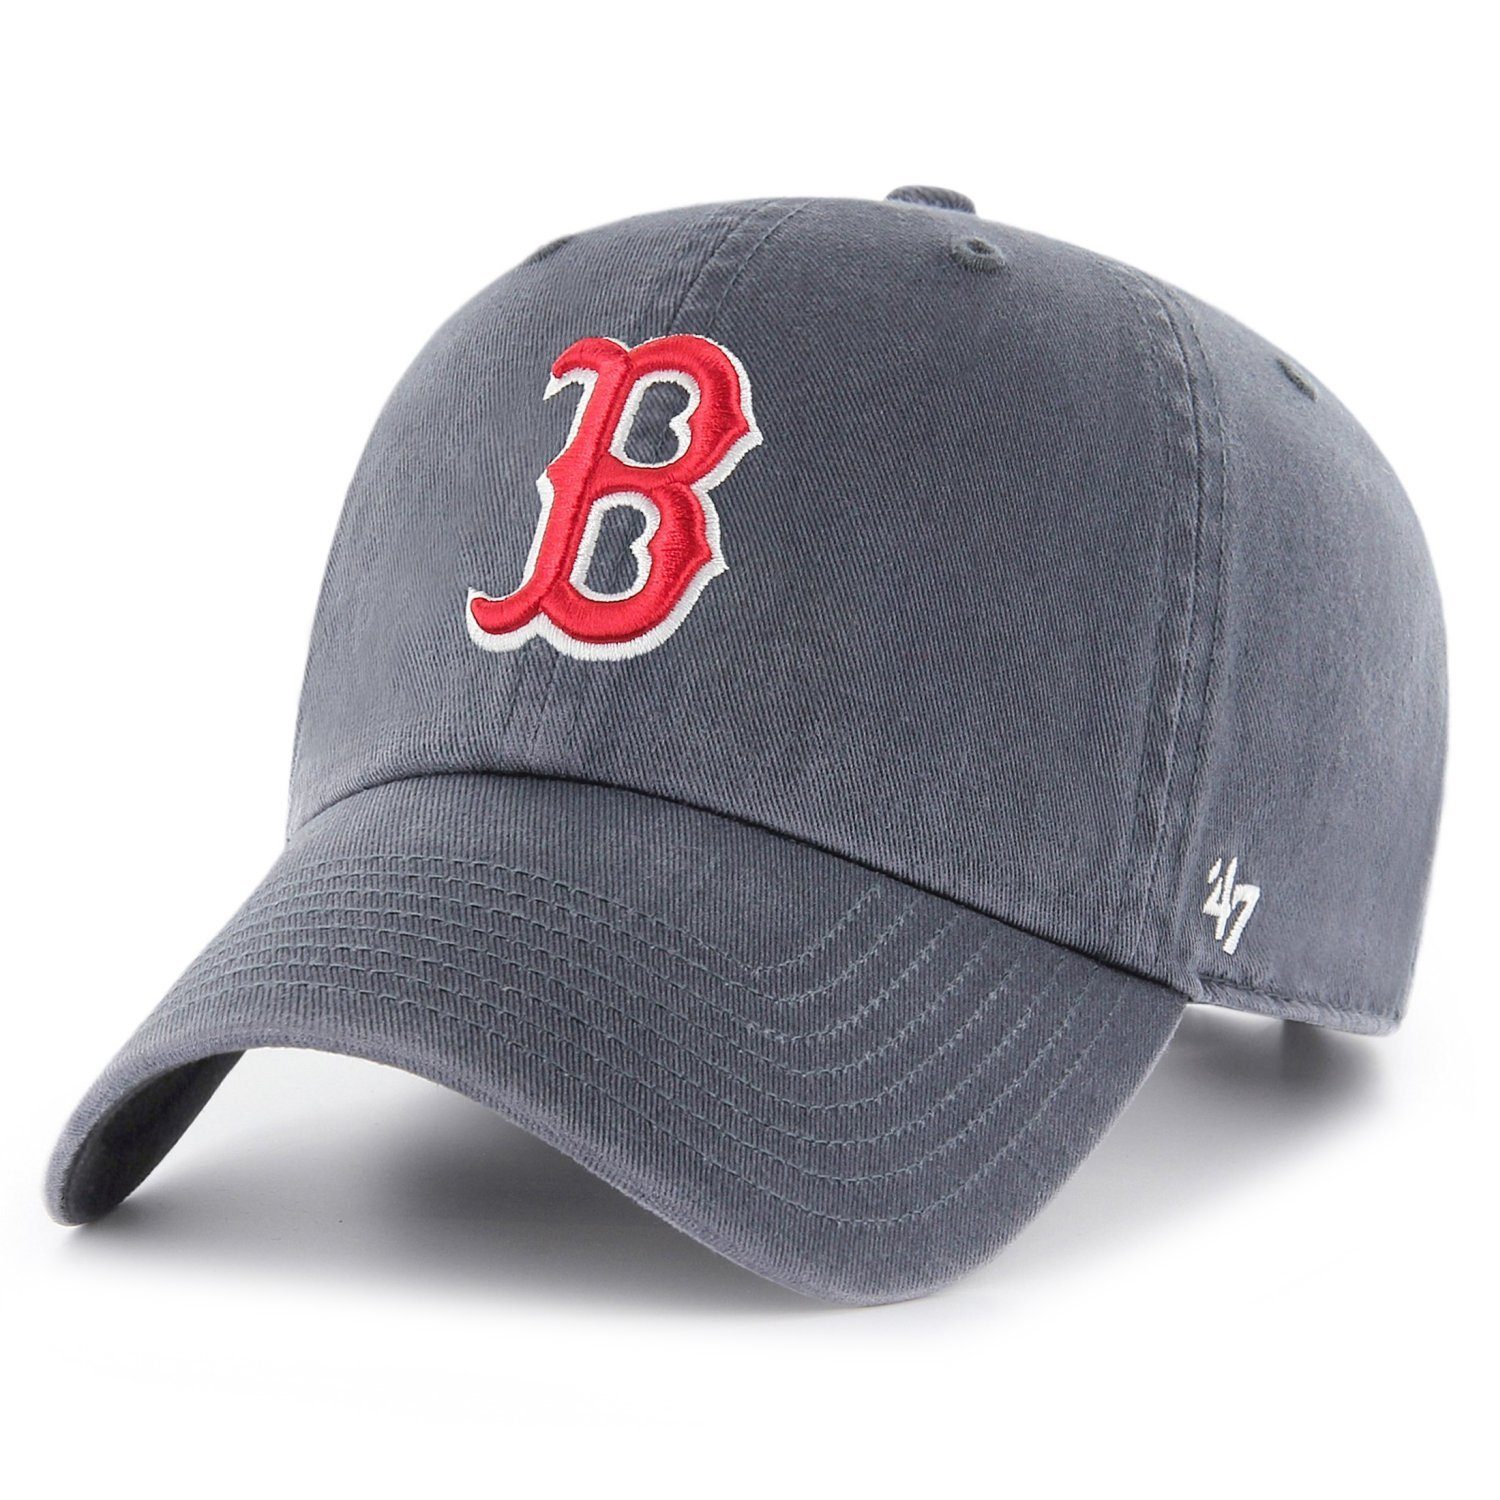 '47 Brand Trucker Cap Relaxed Fit CLEAN UP Boston Red Sox